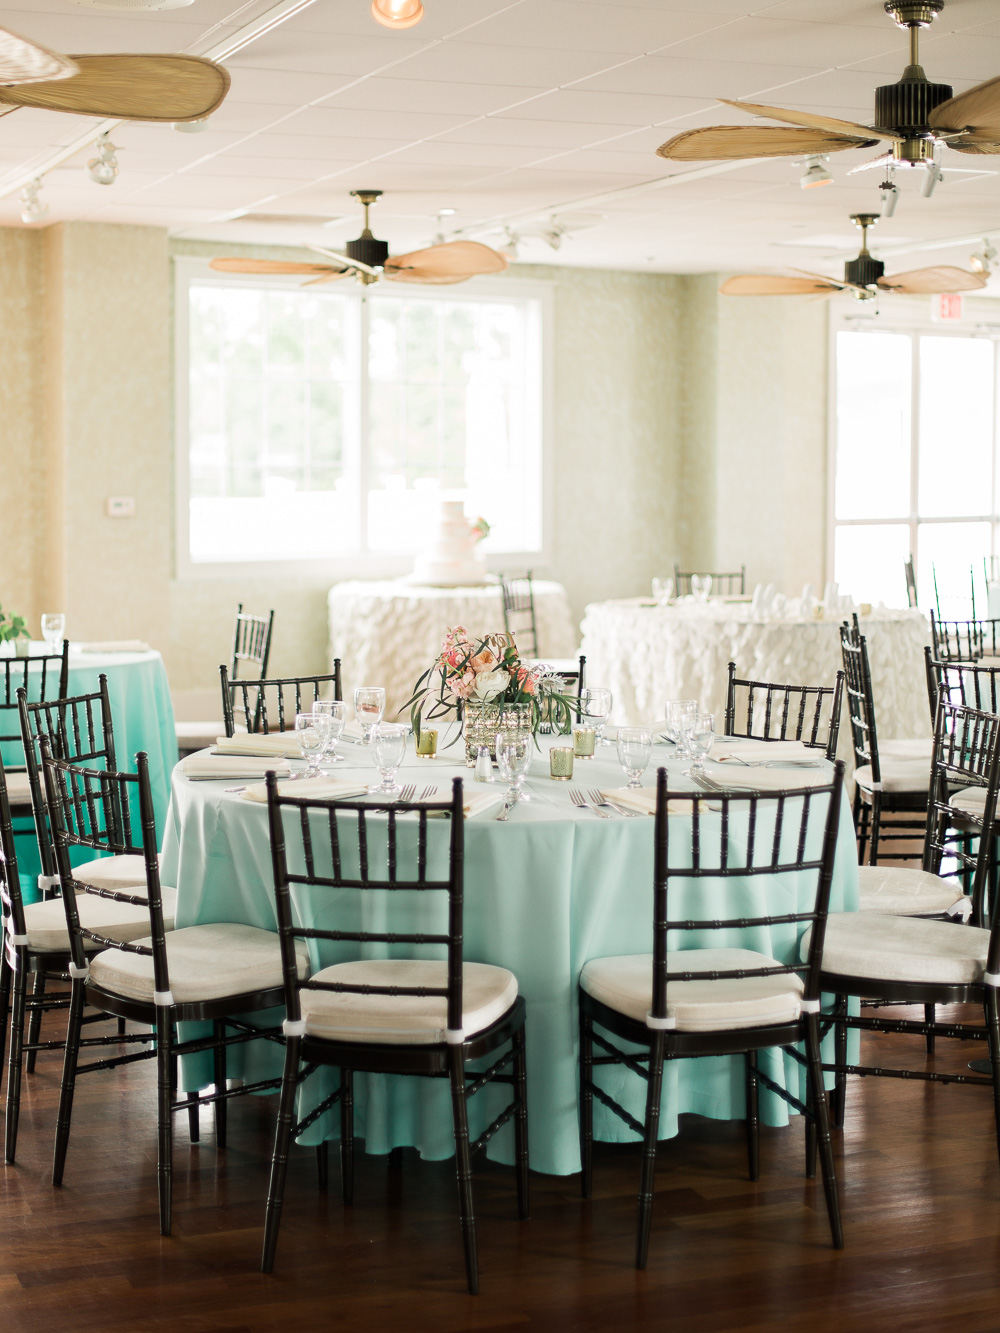 Oyster Farm at King's Creek wedding in Cape Charles, Virginia